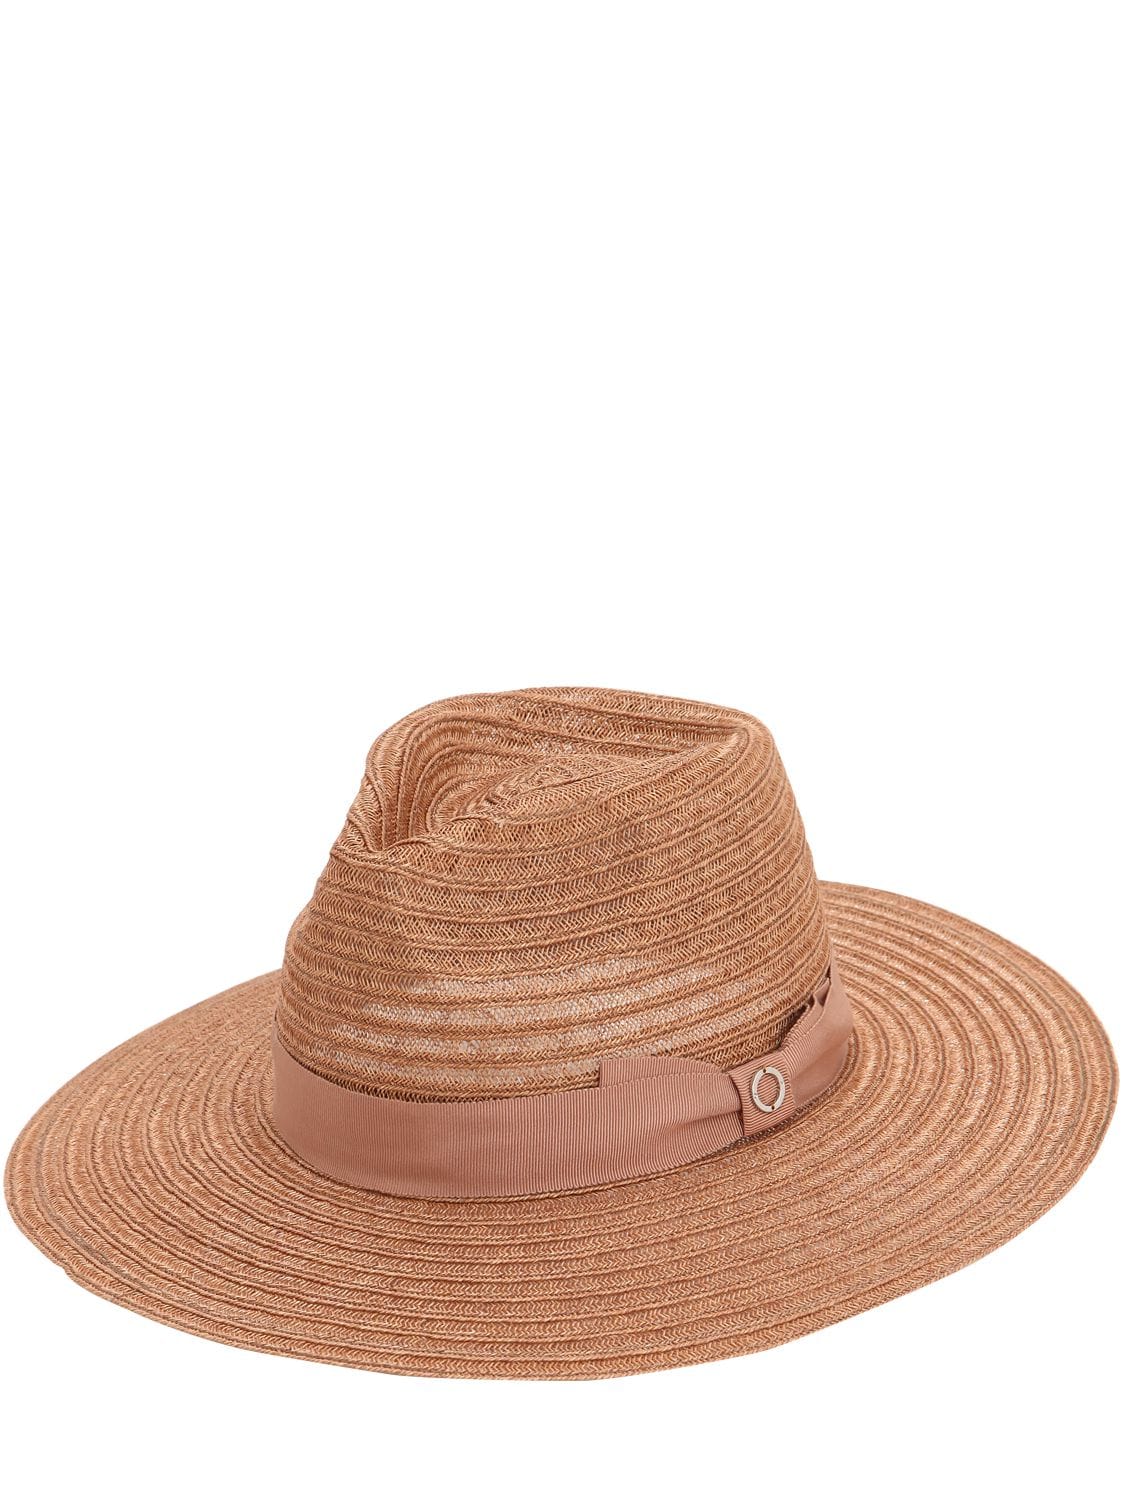 Don Straw Hat W/ Bow In Natural